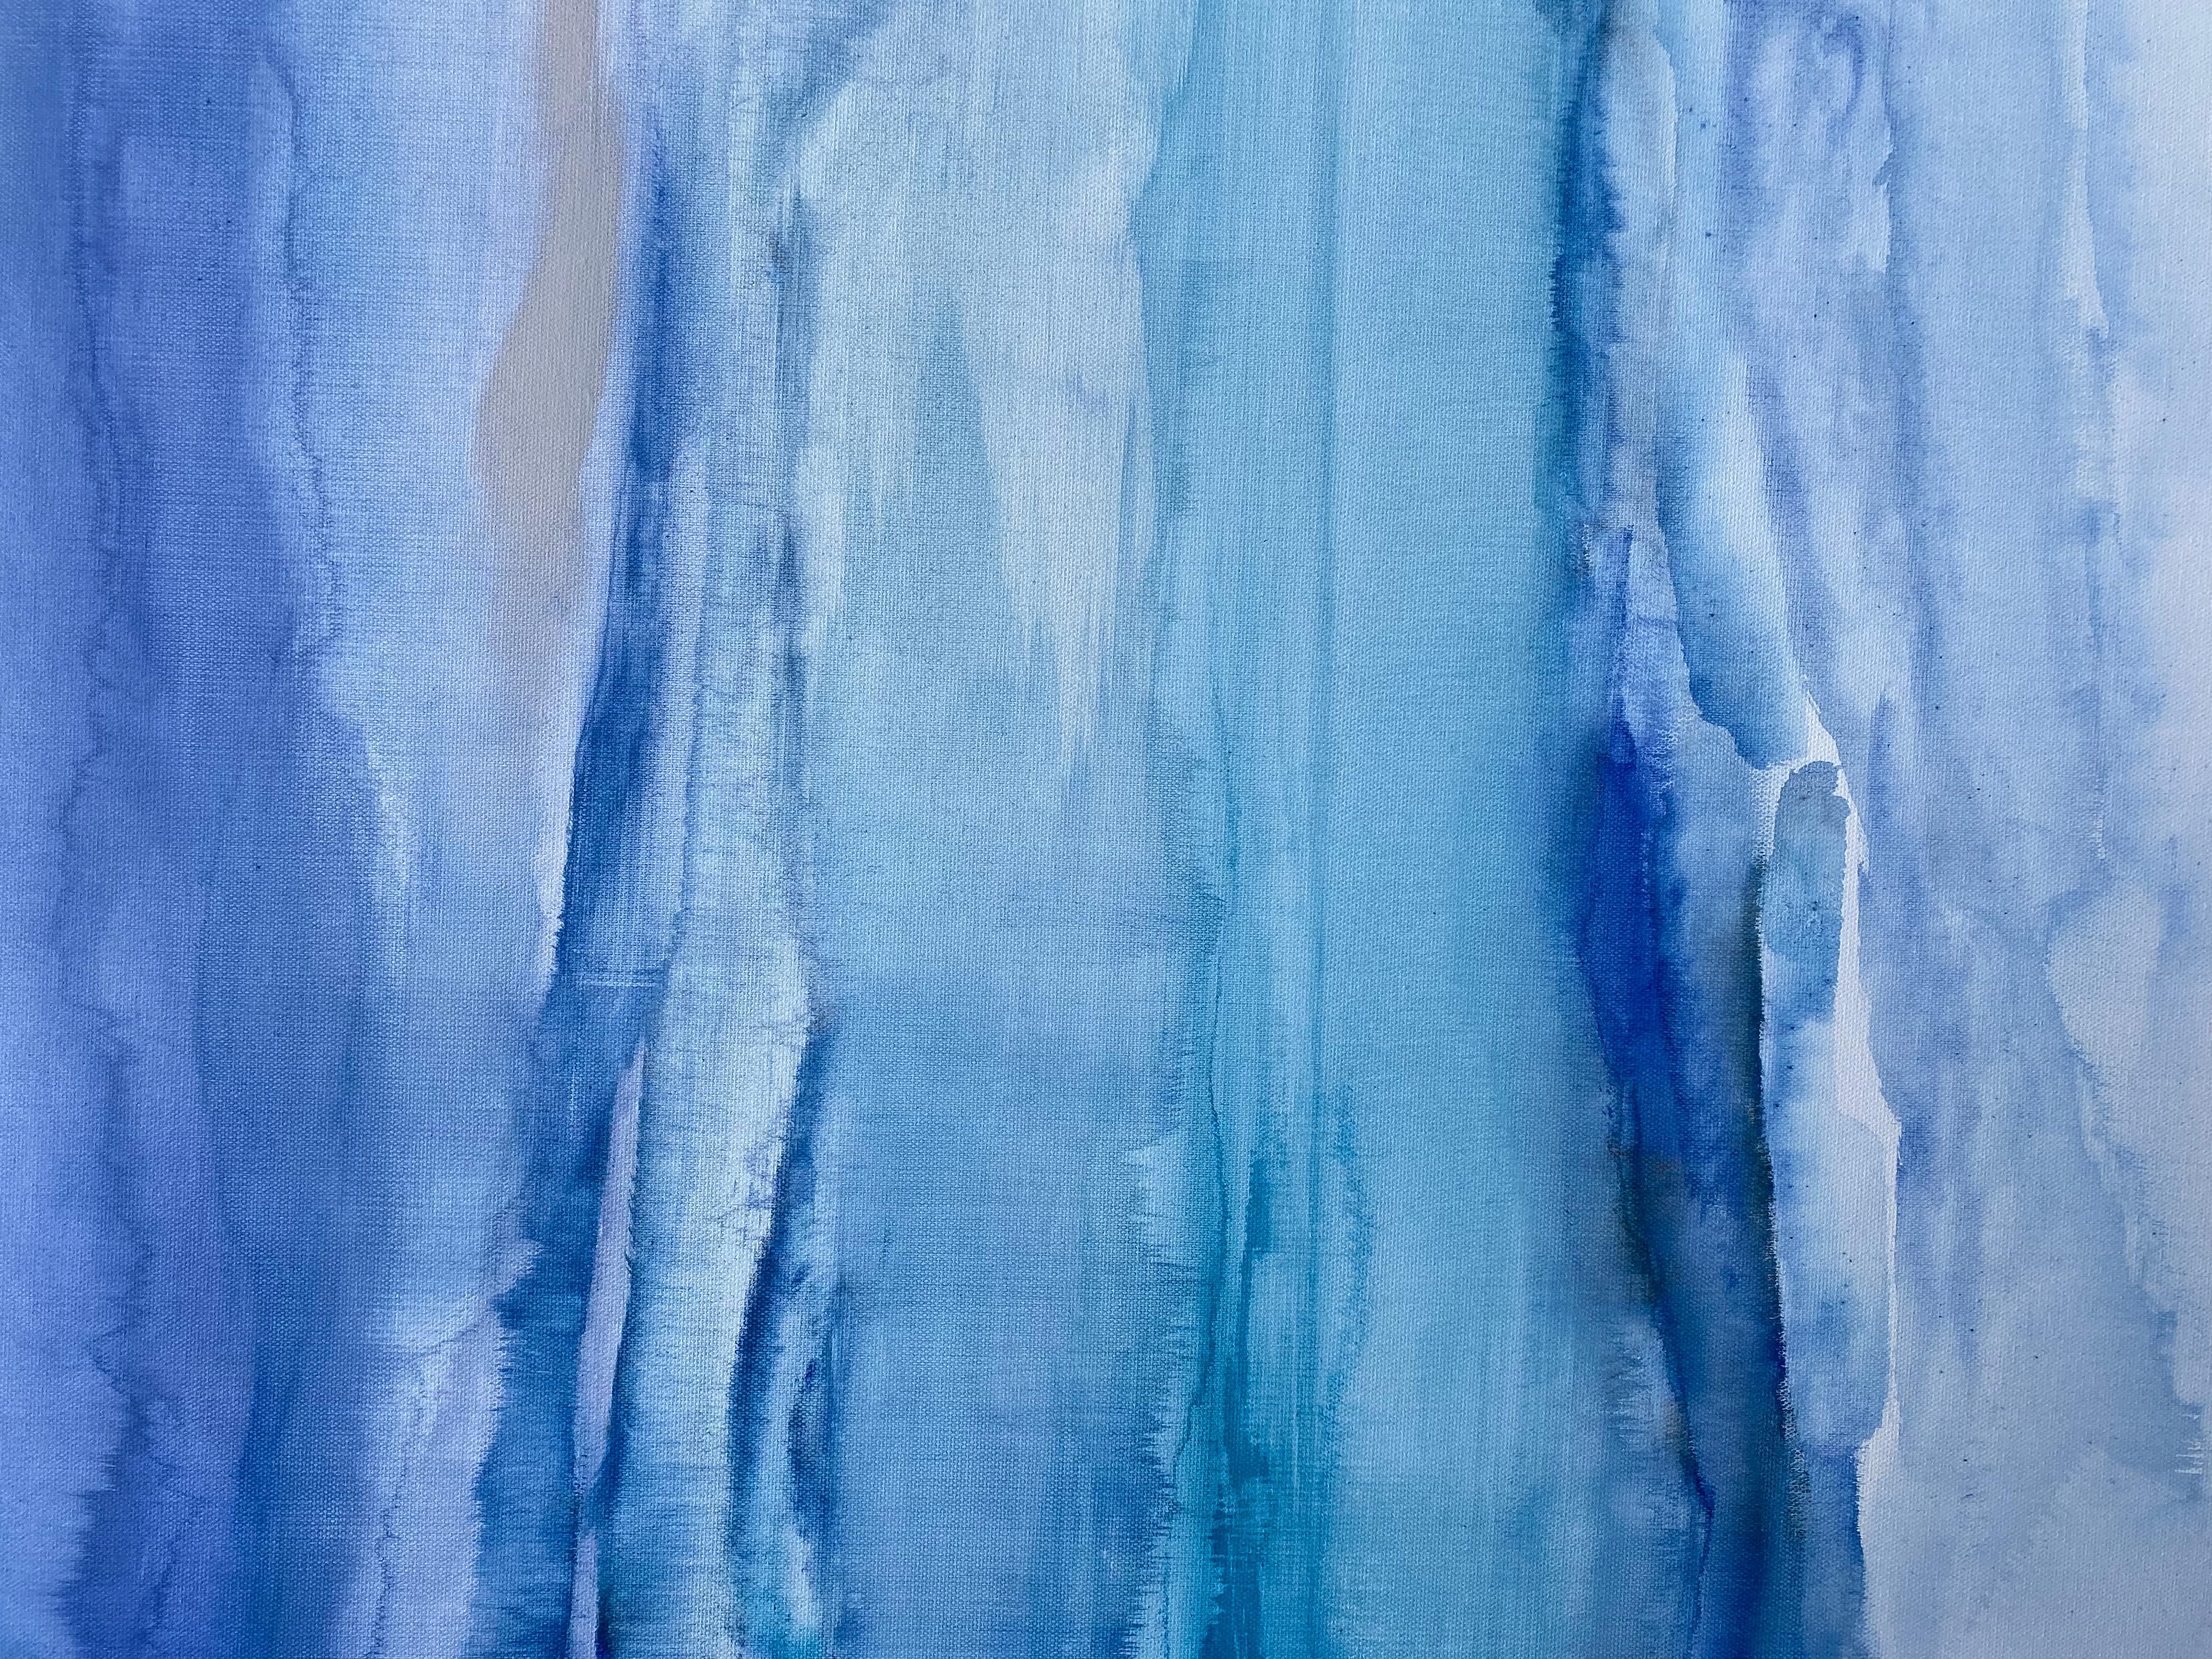 <p>Artist Comments<br />A view from the clouds. Artist Alicia Dunn created a soft abstract piece with translucent layers of cool colors. Lighter shades glow from beneath as dark clouds hover above the atmosphere. 